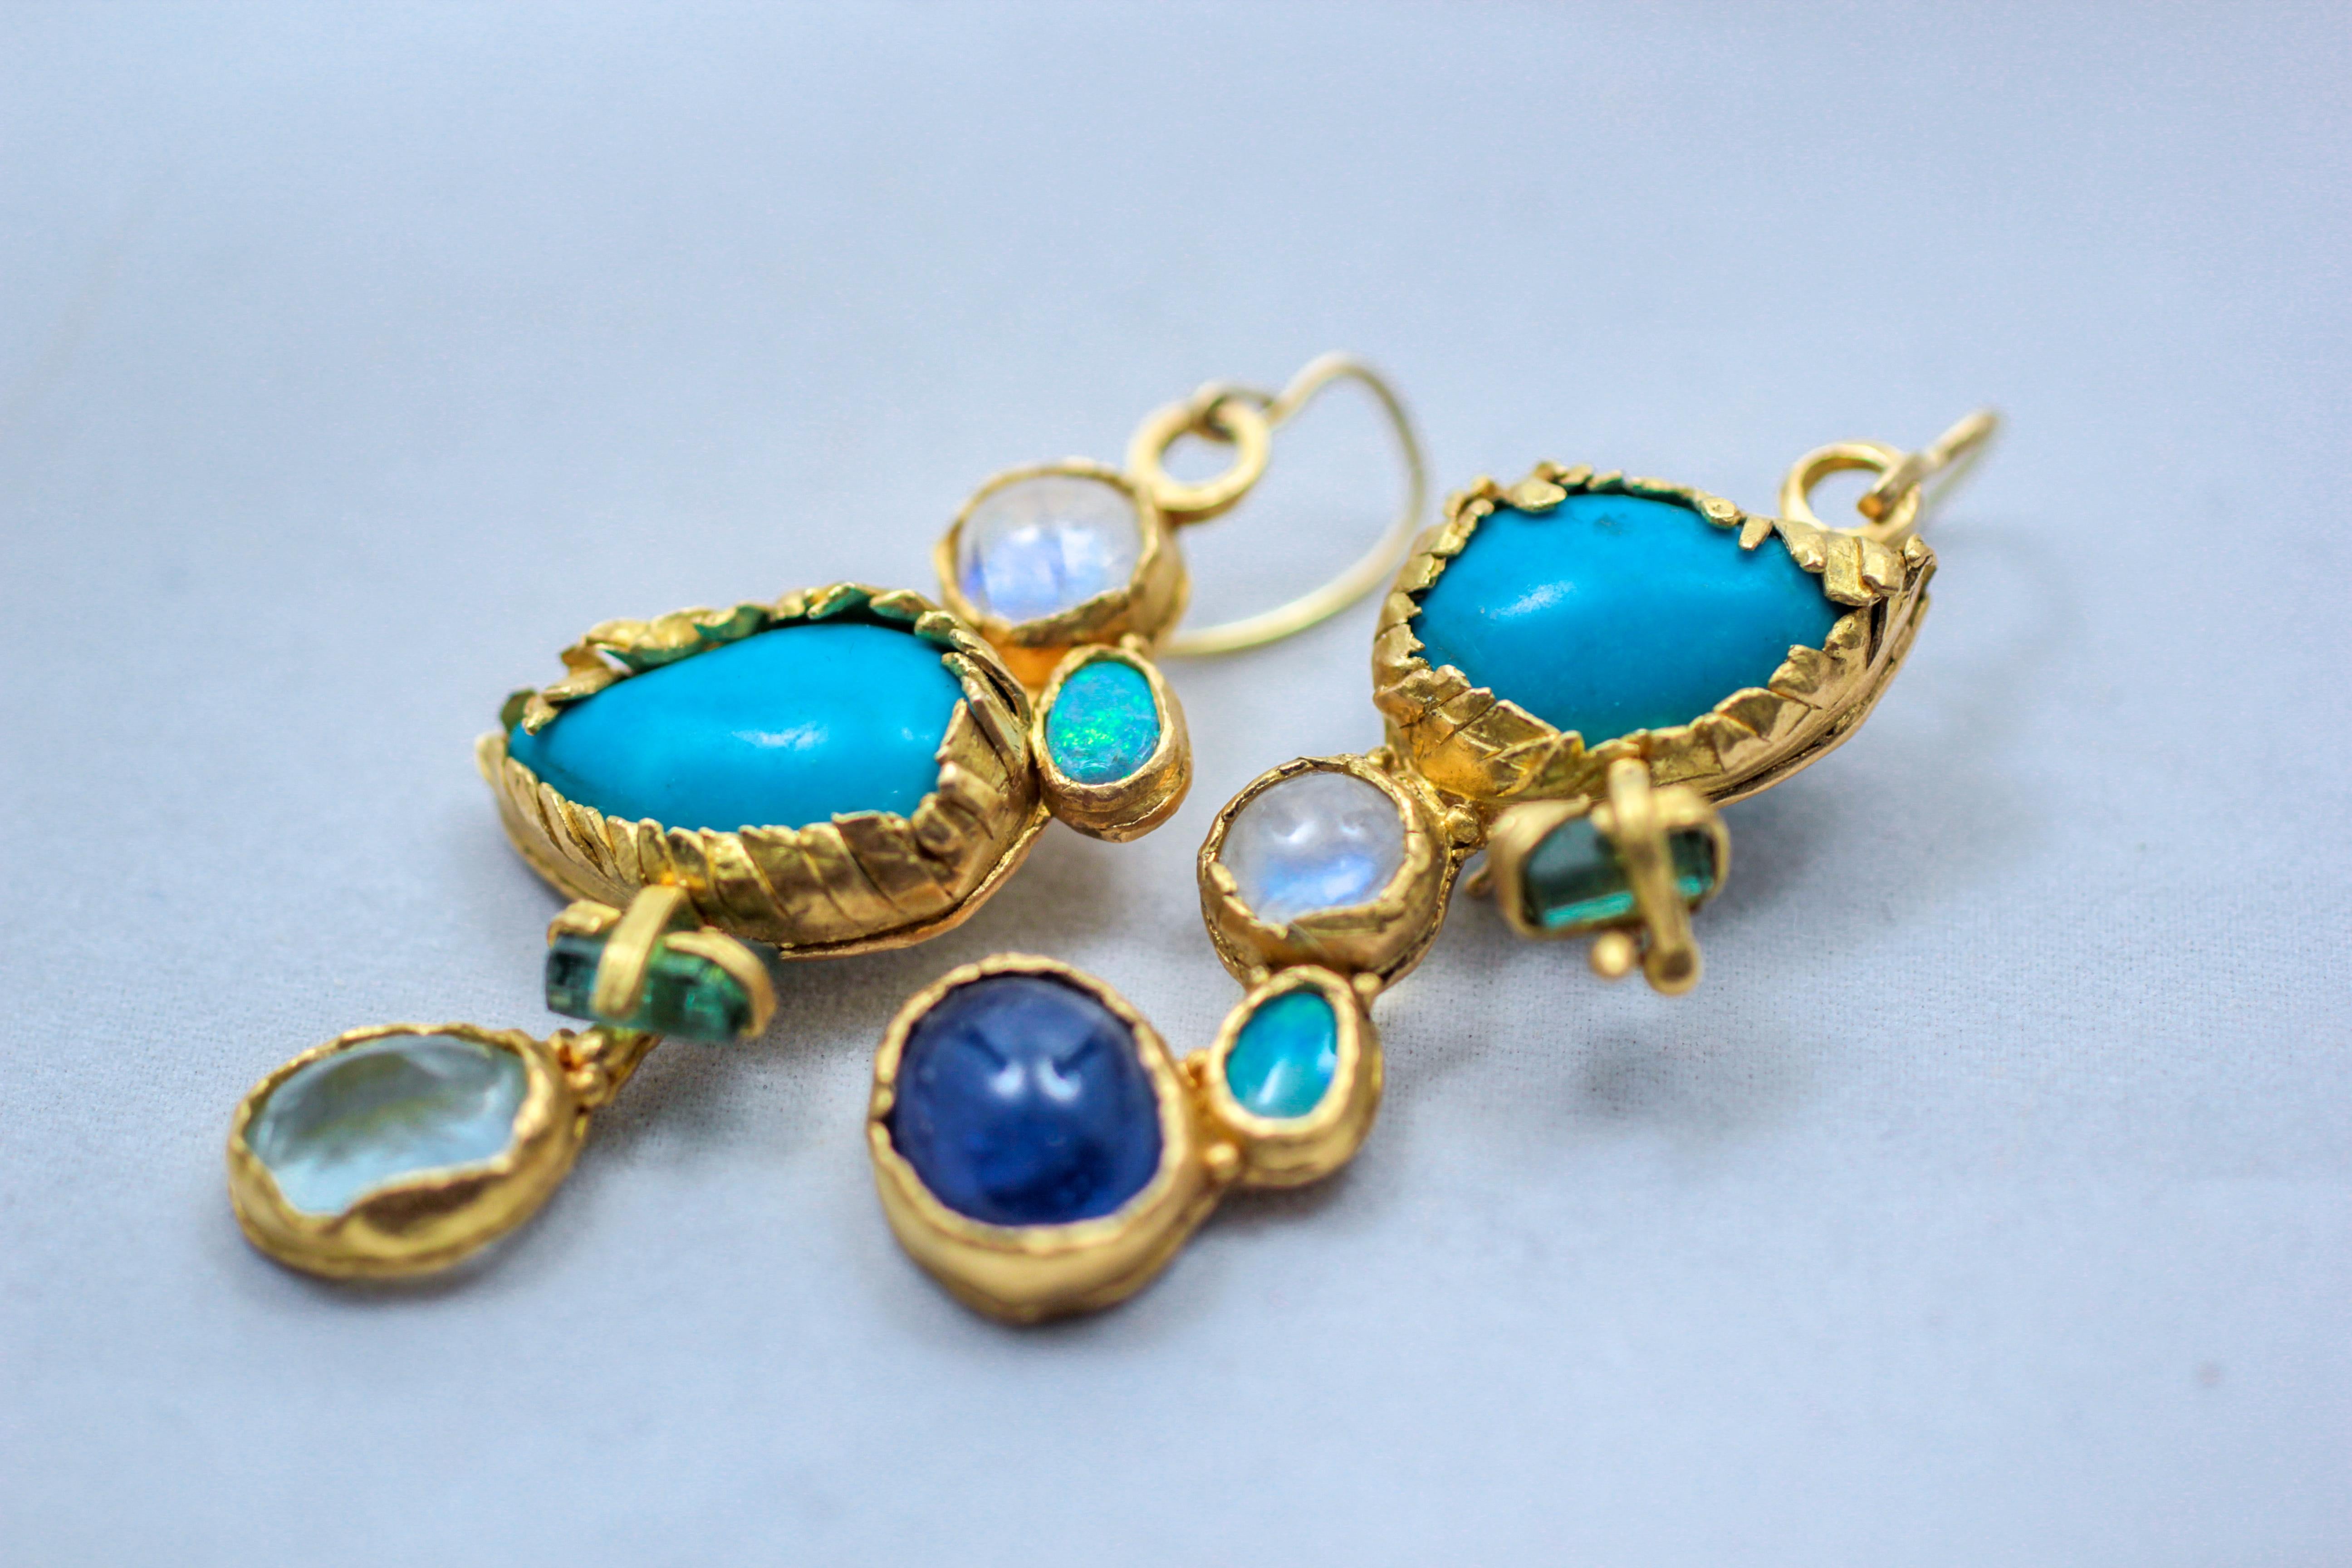 Birds, dangle drop earrings. Turquoise, moonstone, tourmaline crystals, opal, and tanzanite are set in 21K gold bezel. One-of-a-kind, handmade. Feminine and exotic, these will surely start a conversation.

The inspiration for these dangle drop